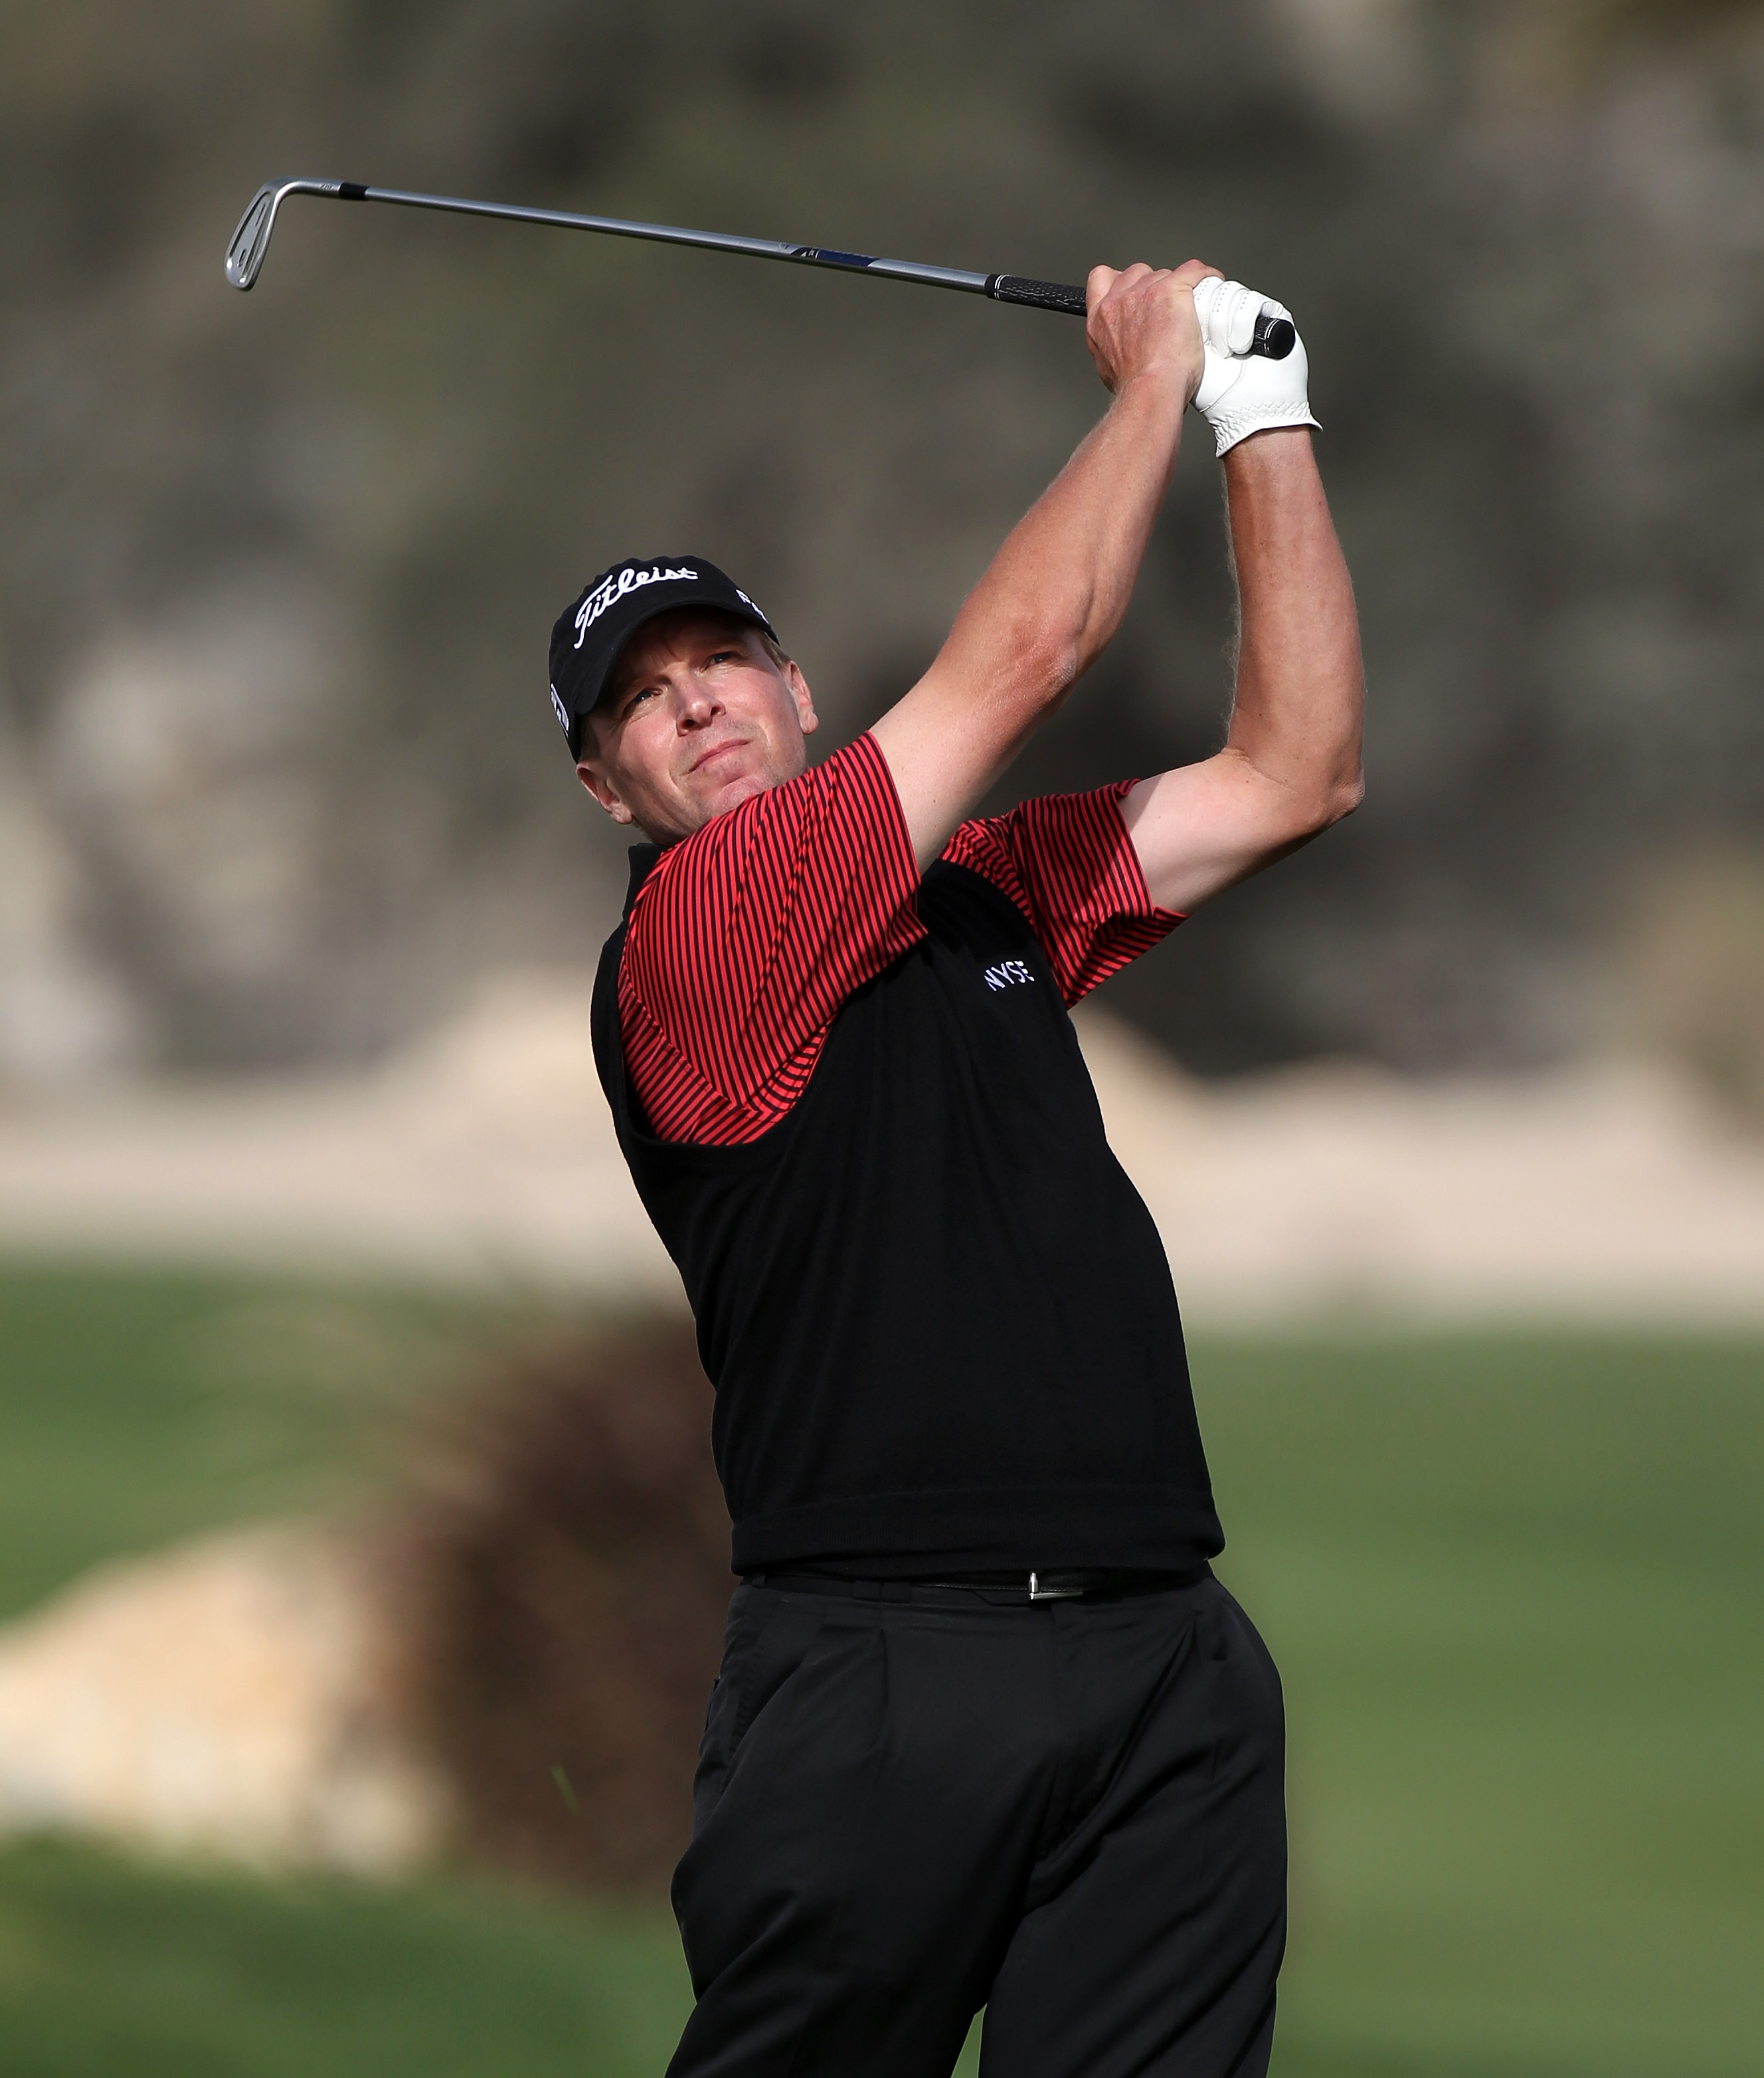 DOHA, QATAR - FEBRUARY 03:  Steve Stricker of the USA during the first round of the Commercialbank Qatar Masters at the Doha Golf Club on February 3, 2011 in Doha, Qatar.  (Photo by Ross Kinnaird/Getty Images)